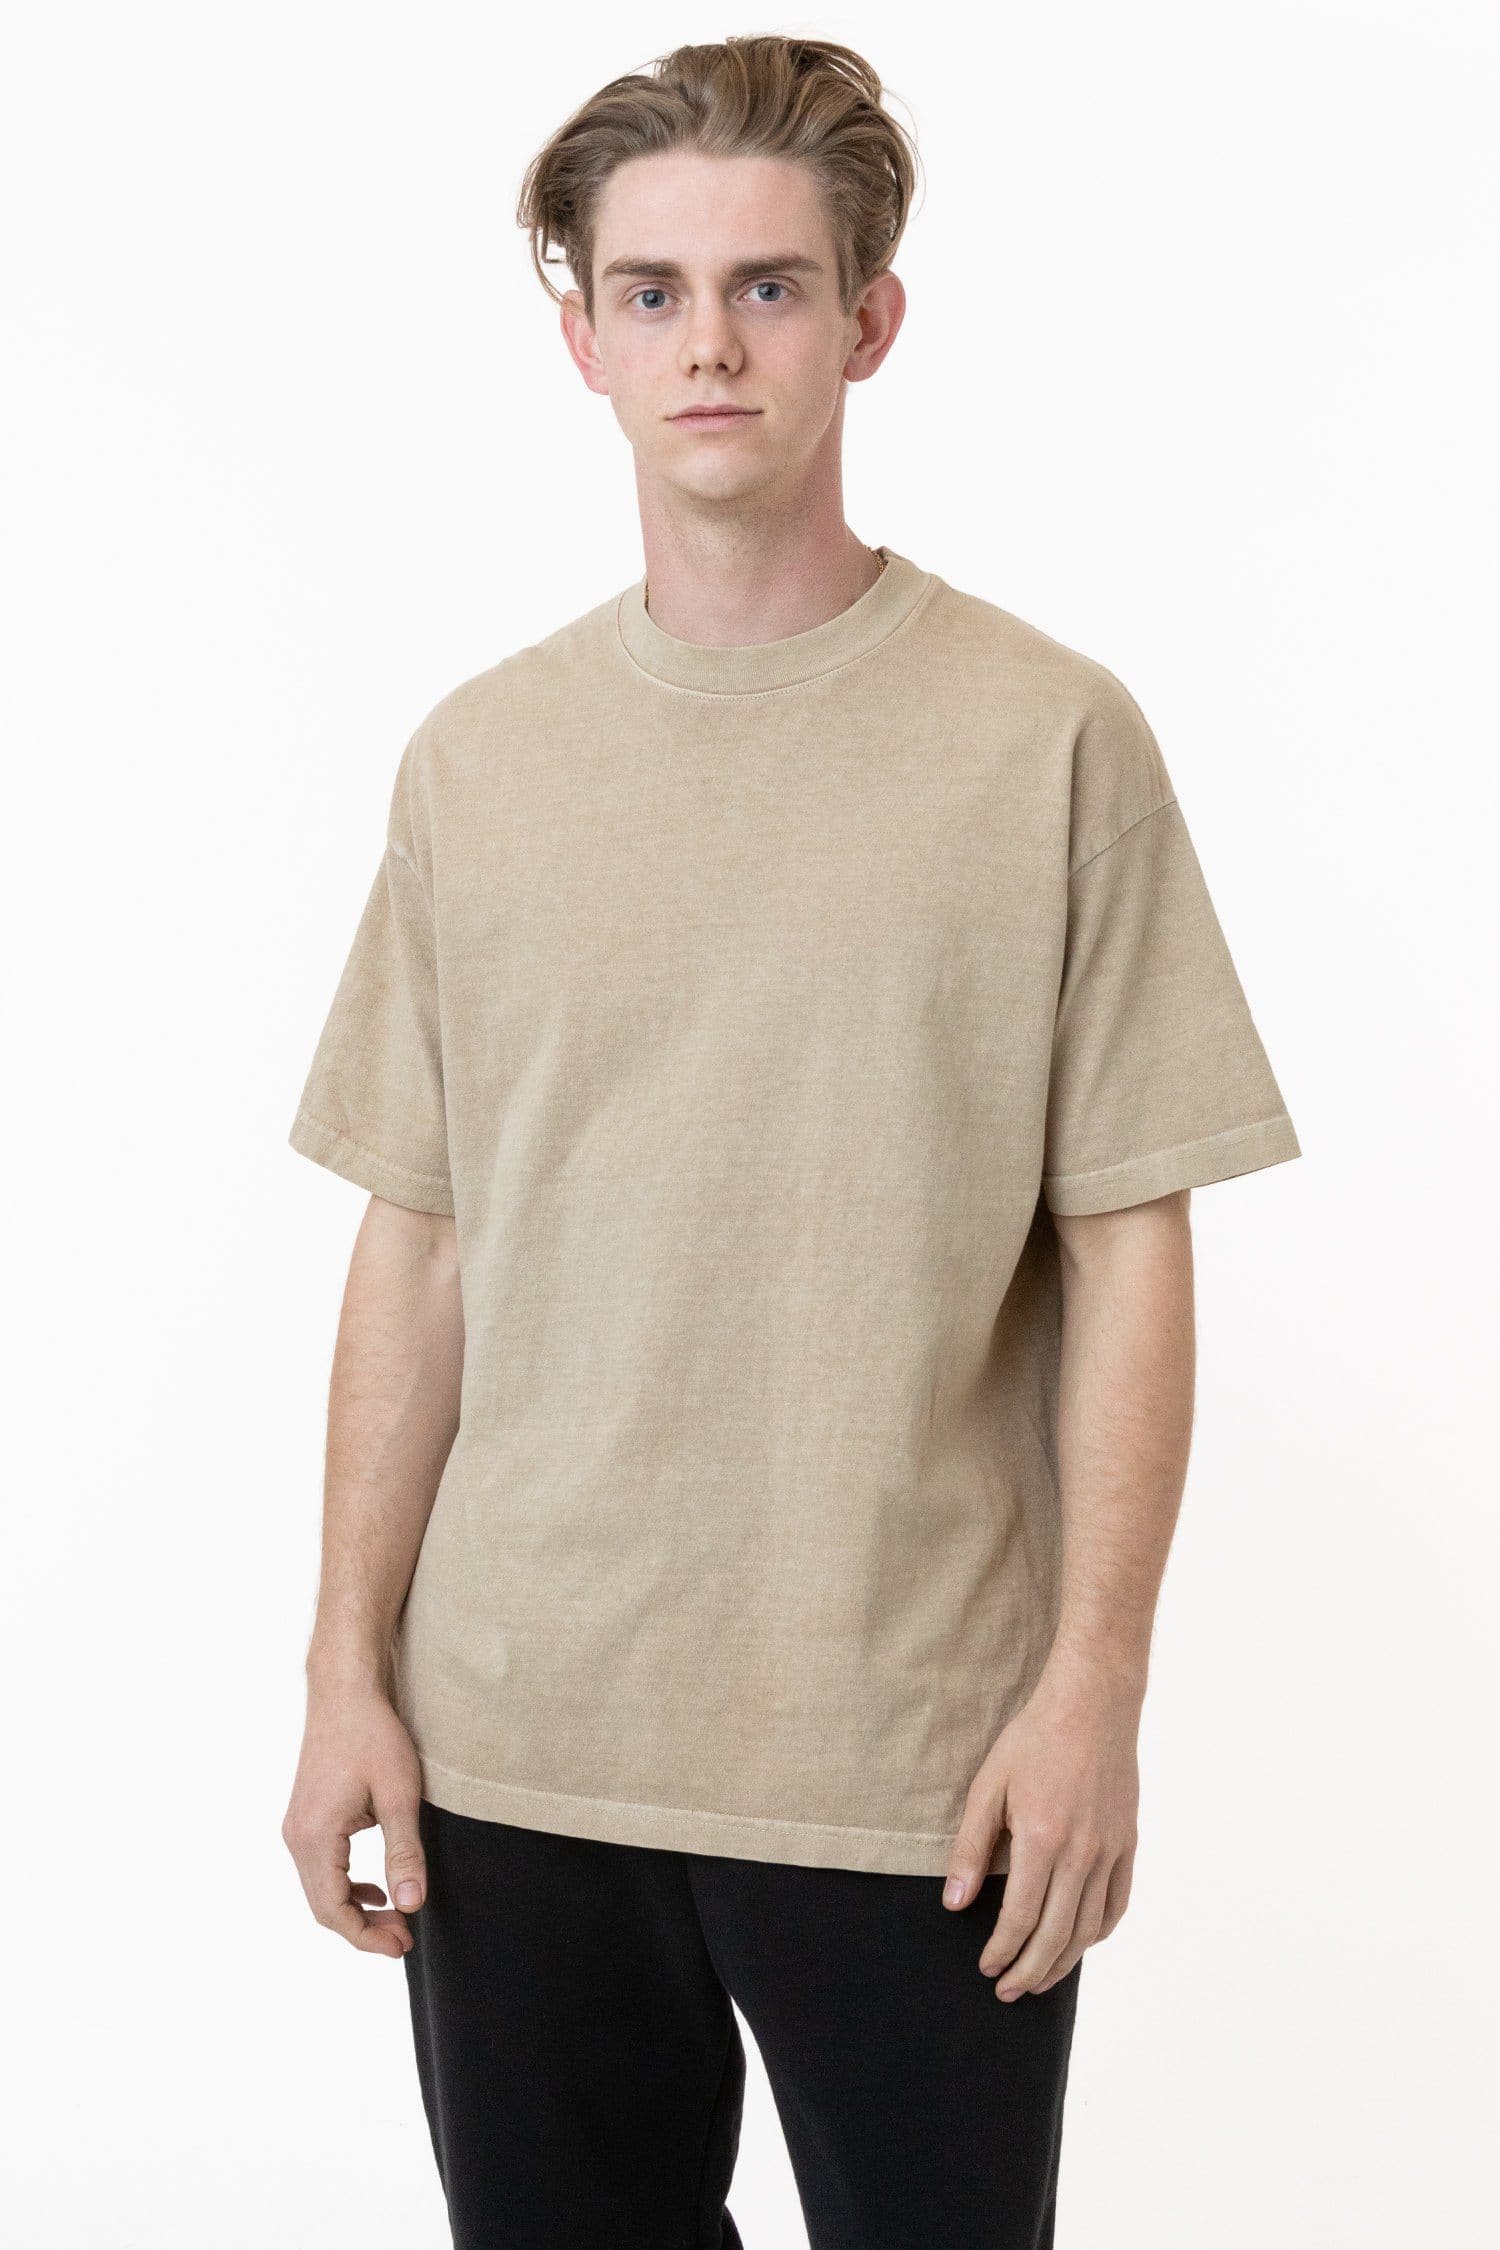 used wear_PIGMENT DYED CHEACK LONG SHIRT - csihealth.net